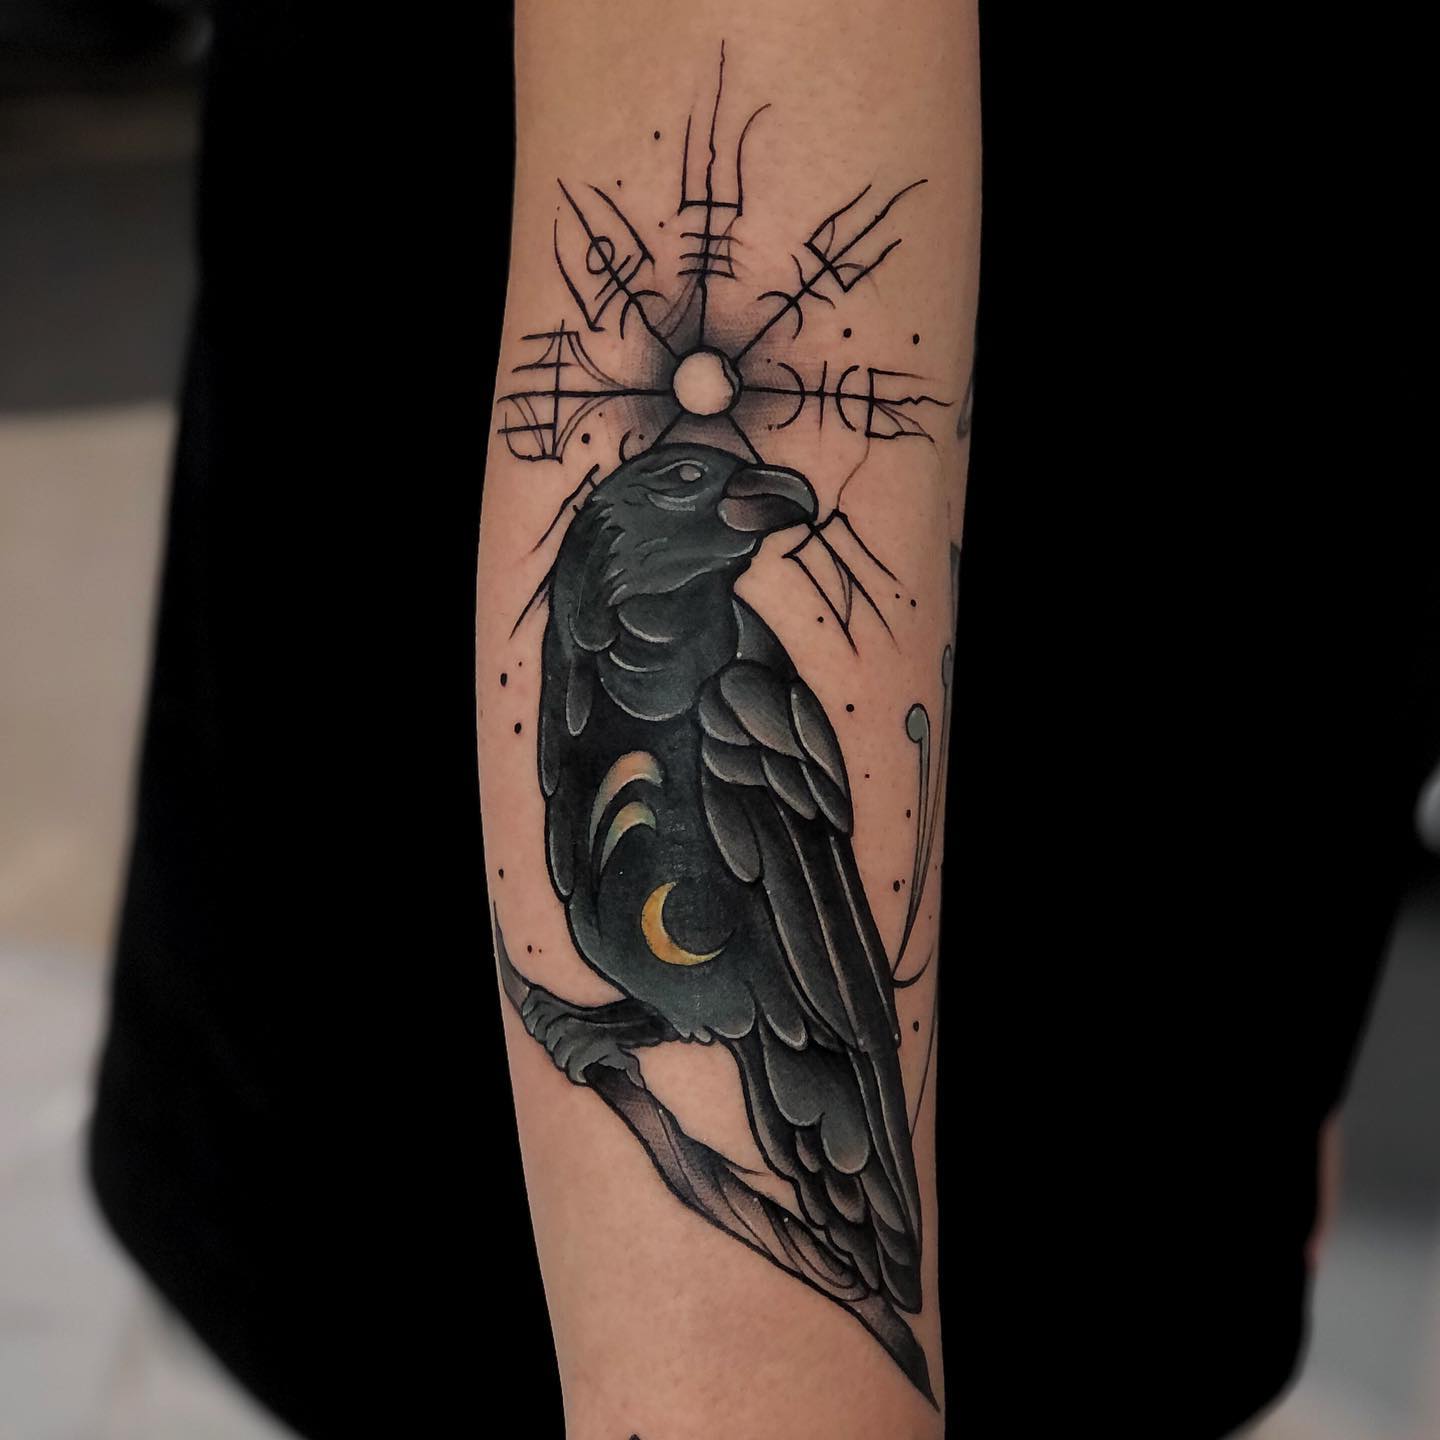 Amazing Nordic Raven Tattoos Inspired by Vikings: 34 Photo Ideas